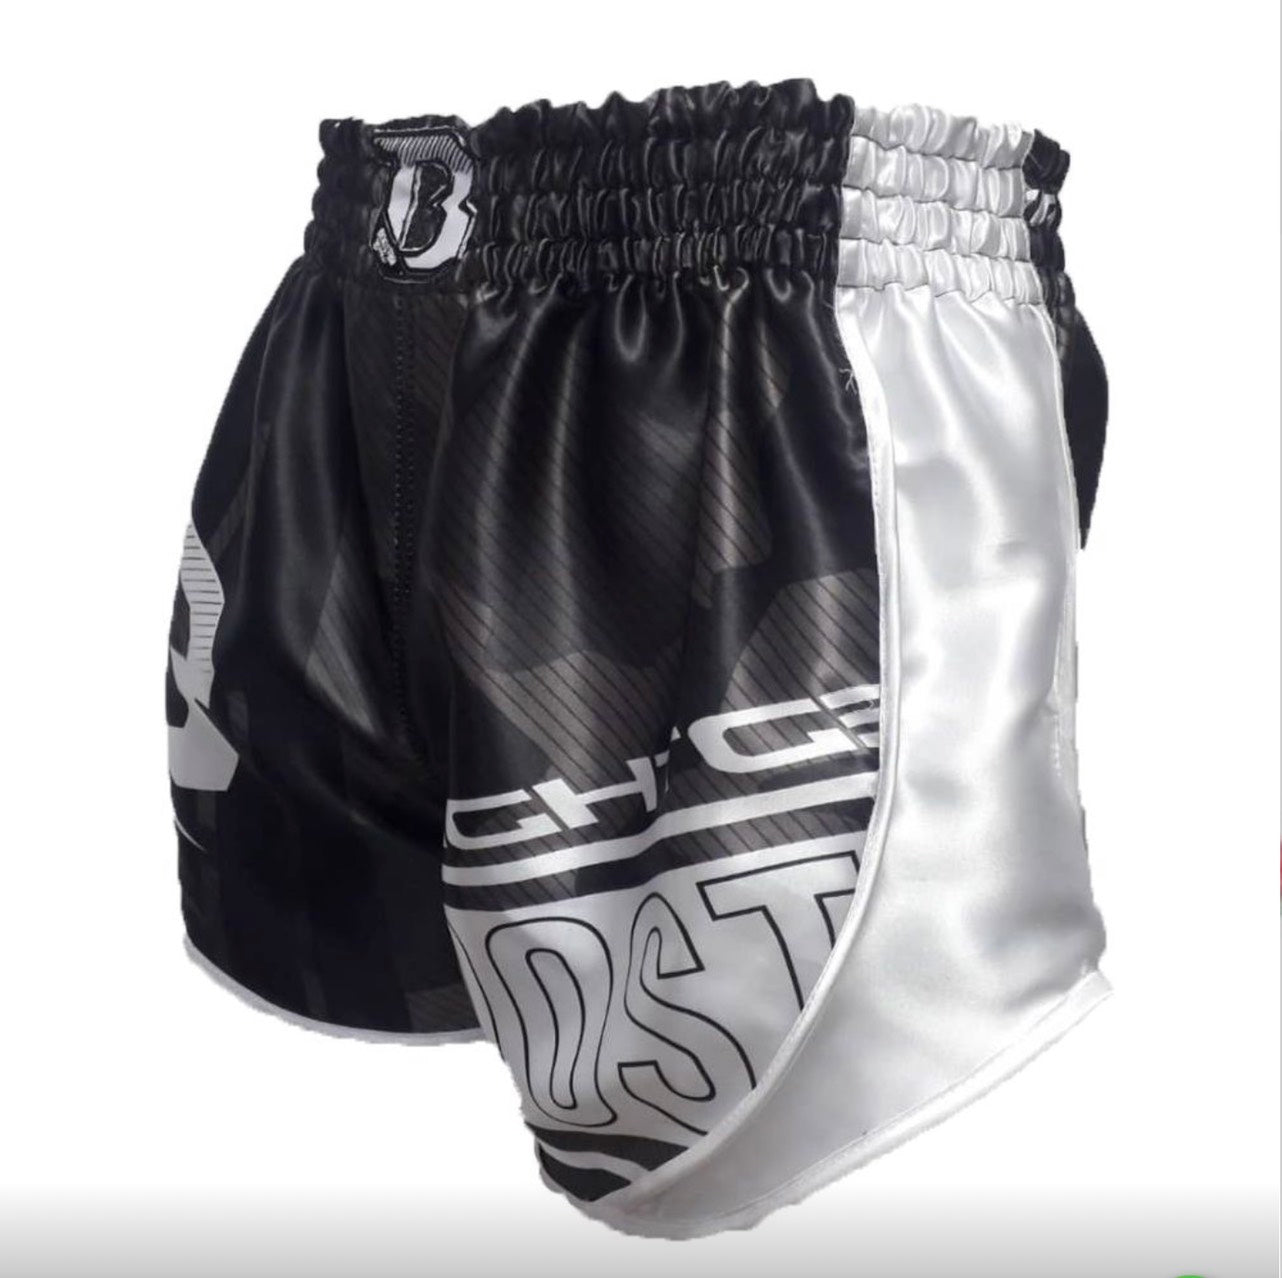 Booster Shorts B Force 1 White Booster